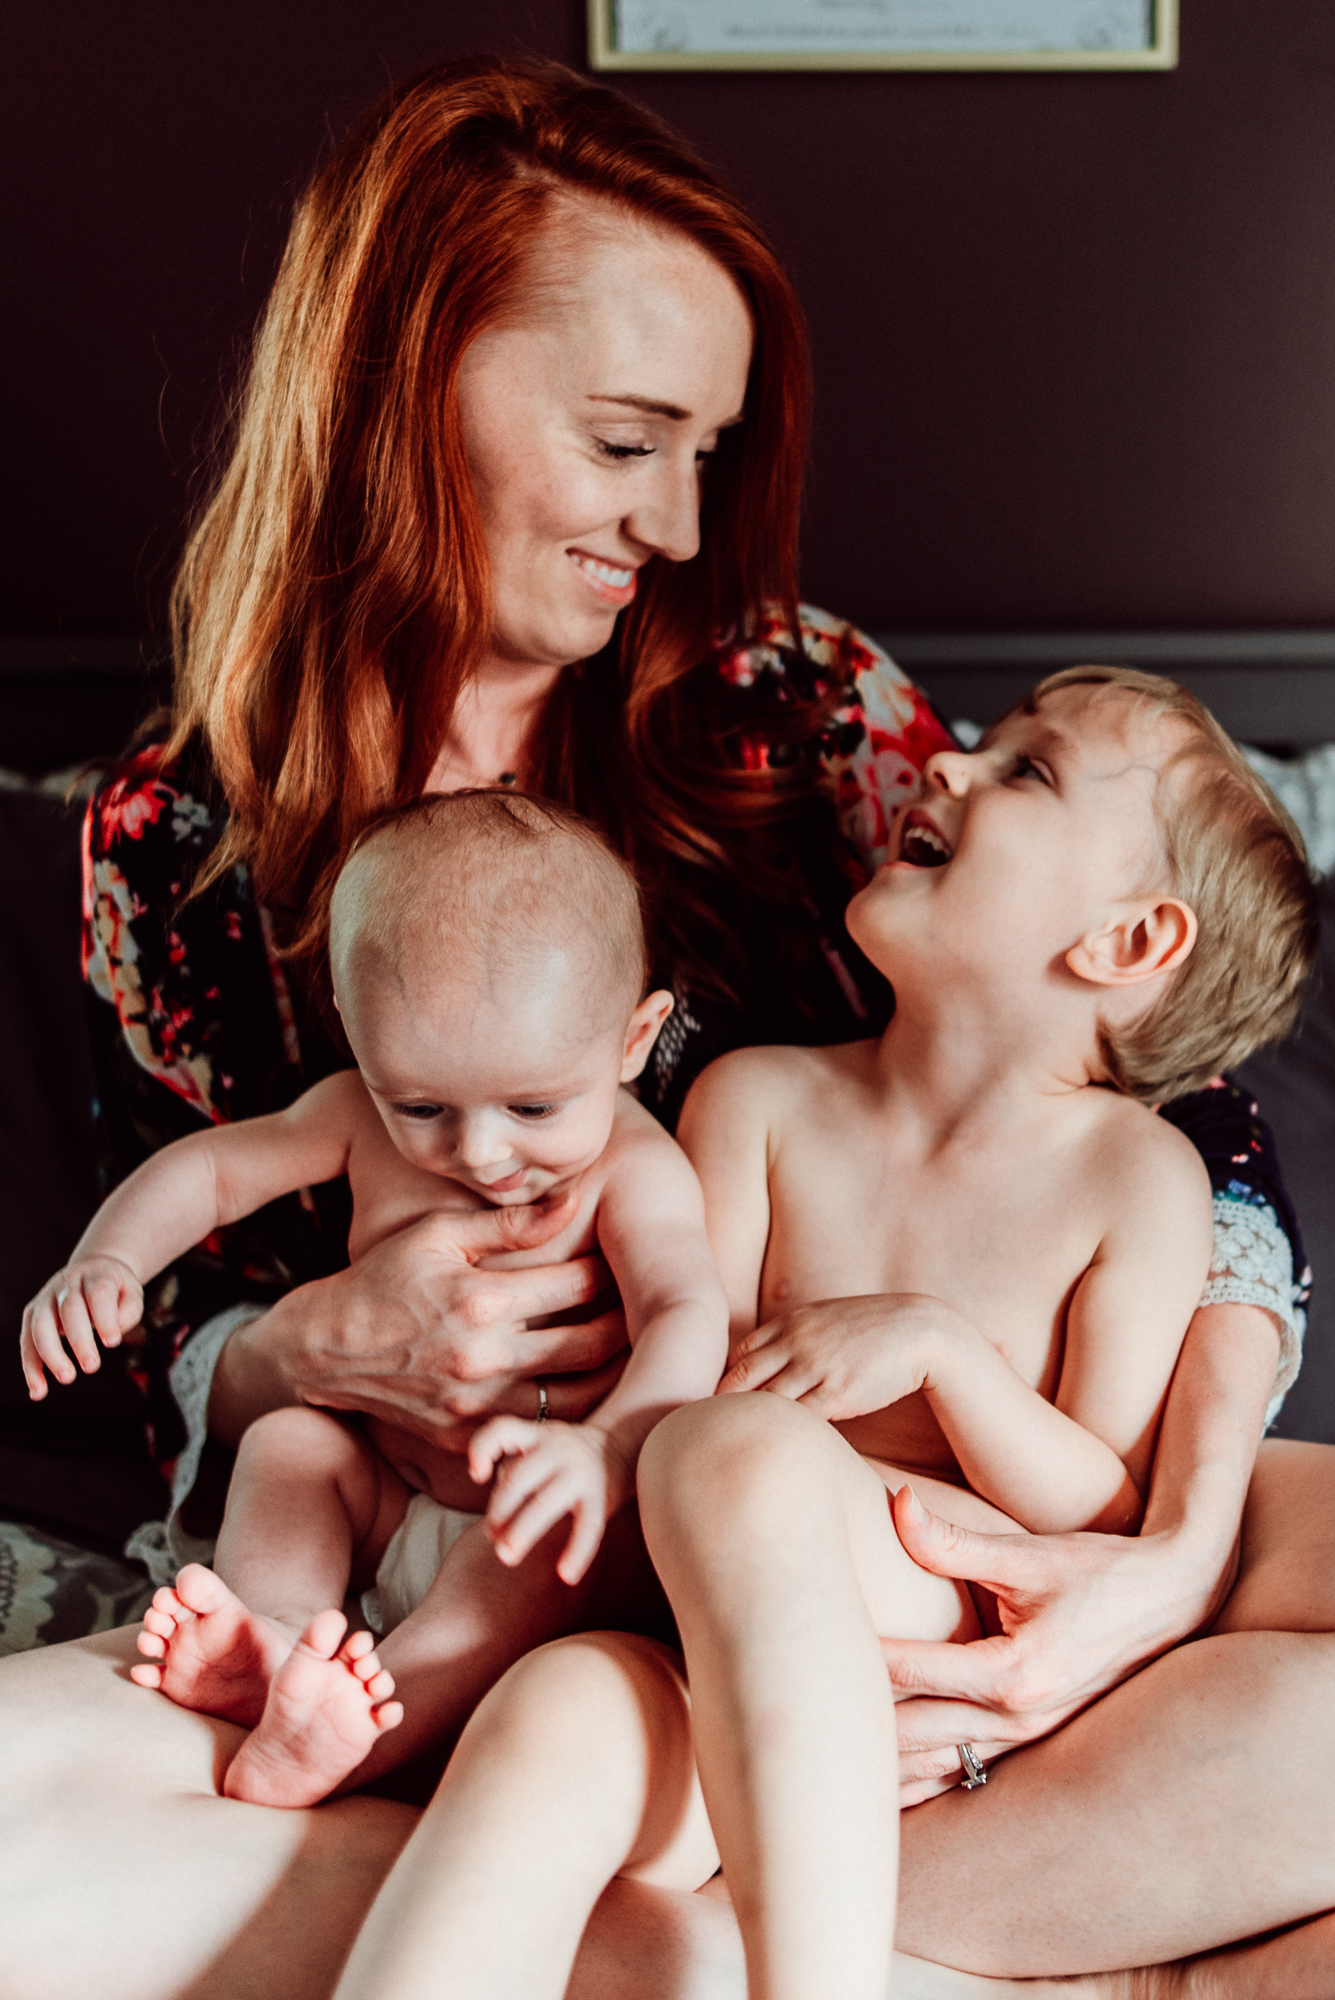 Minneapolis Postpartum Photography by Meredith Westin-May 14, 2019-131538.jpg